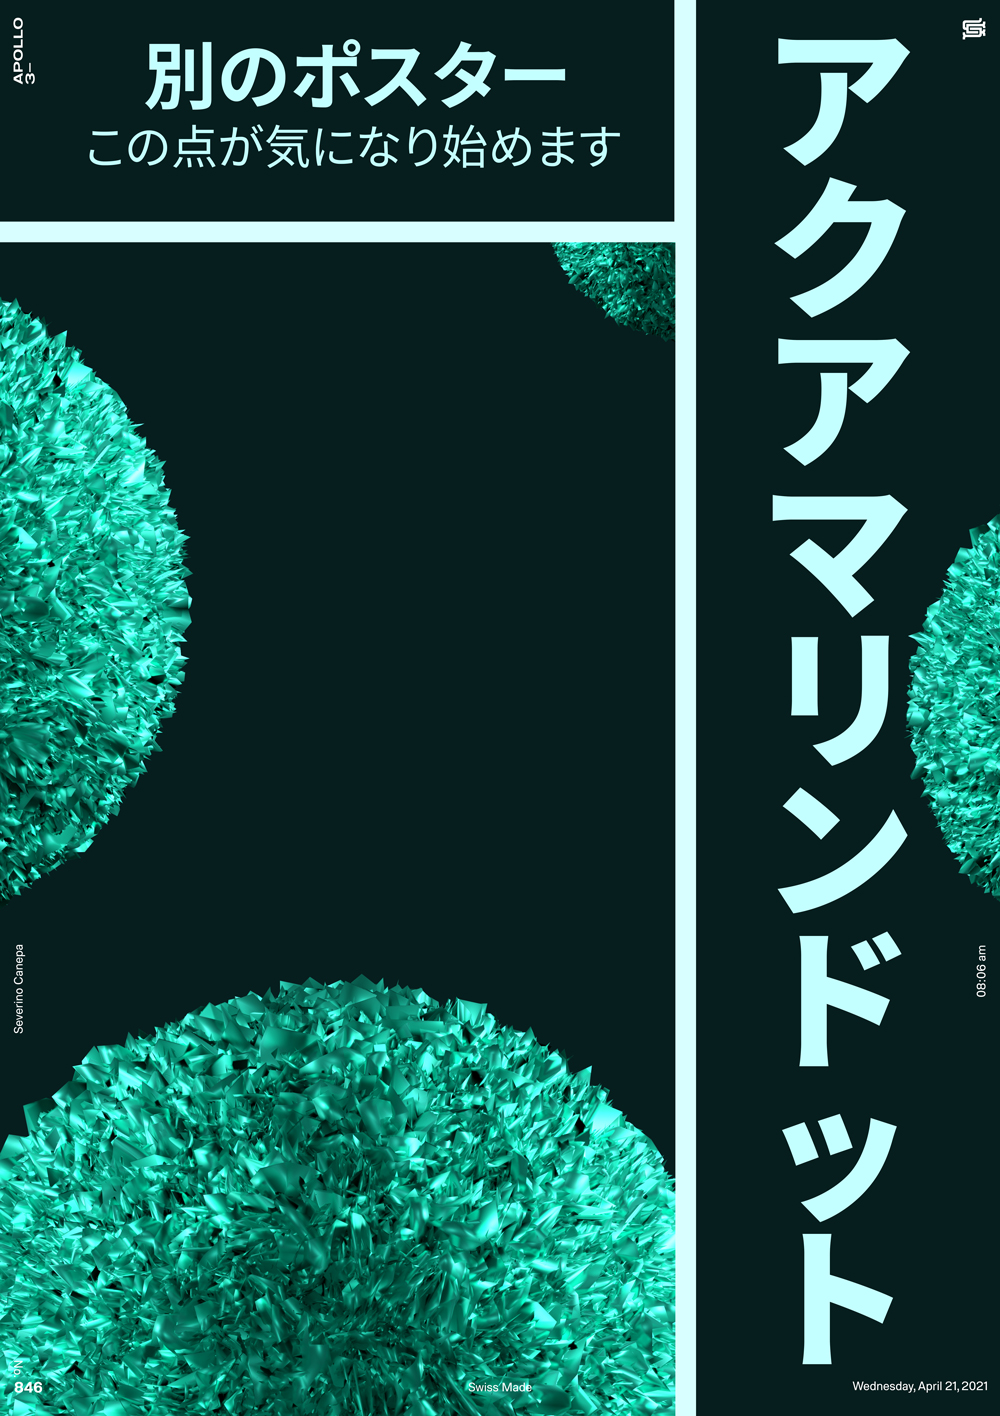 Visual creation made with abstract 3D shapes and Japanese typography